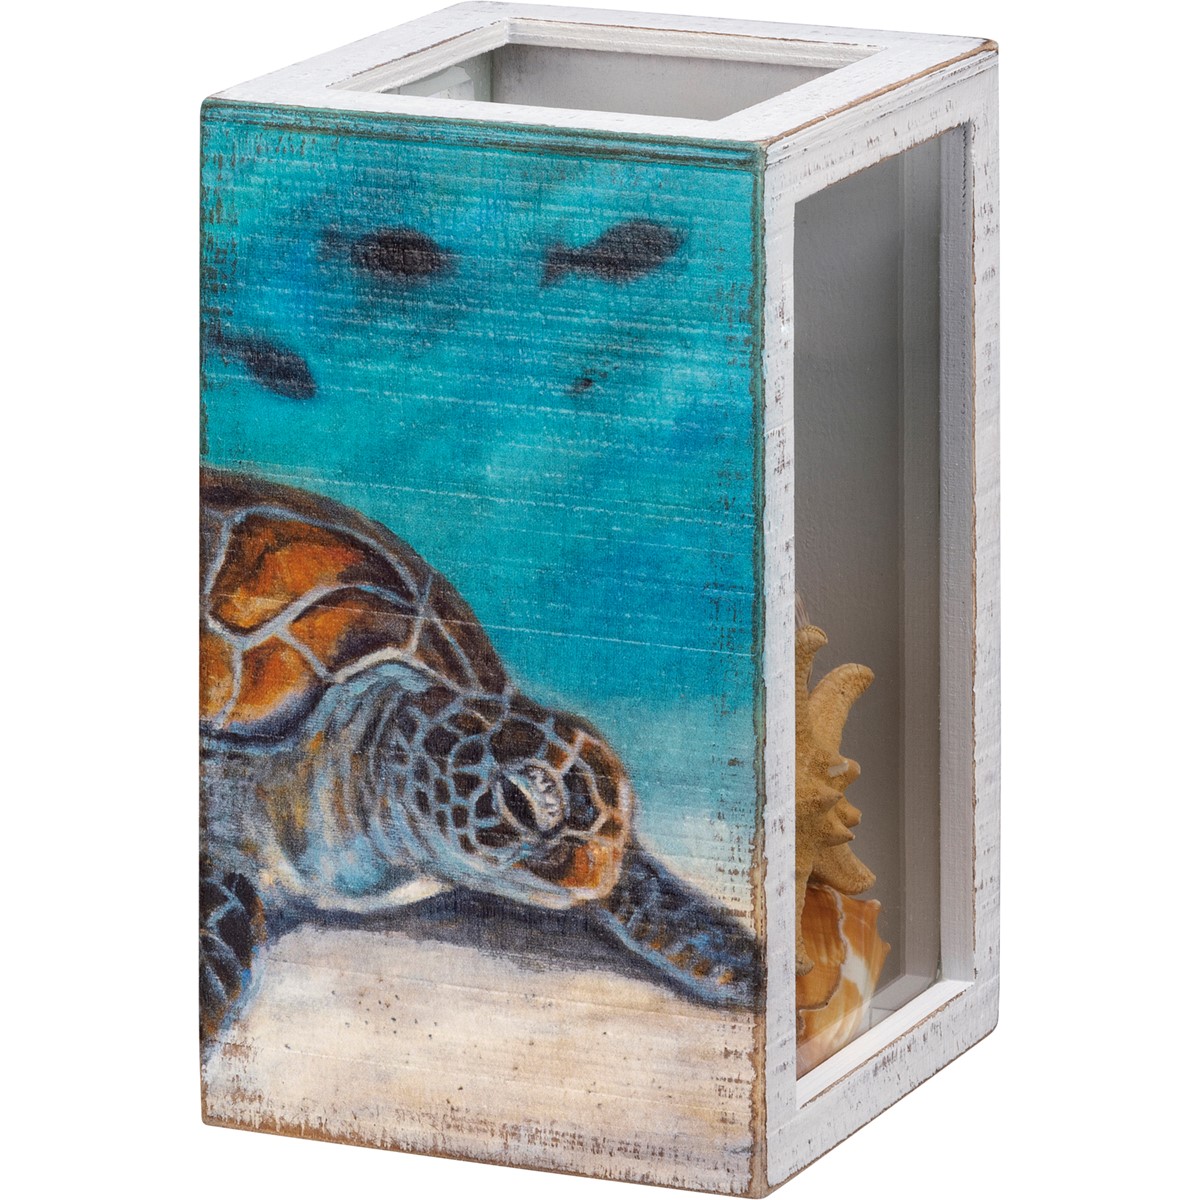 Sea Turtle Shell Holder - Wood, Paper, Glass